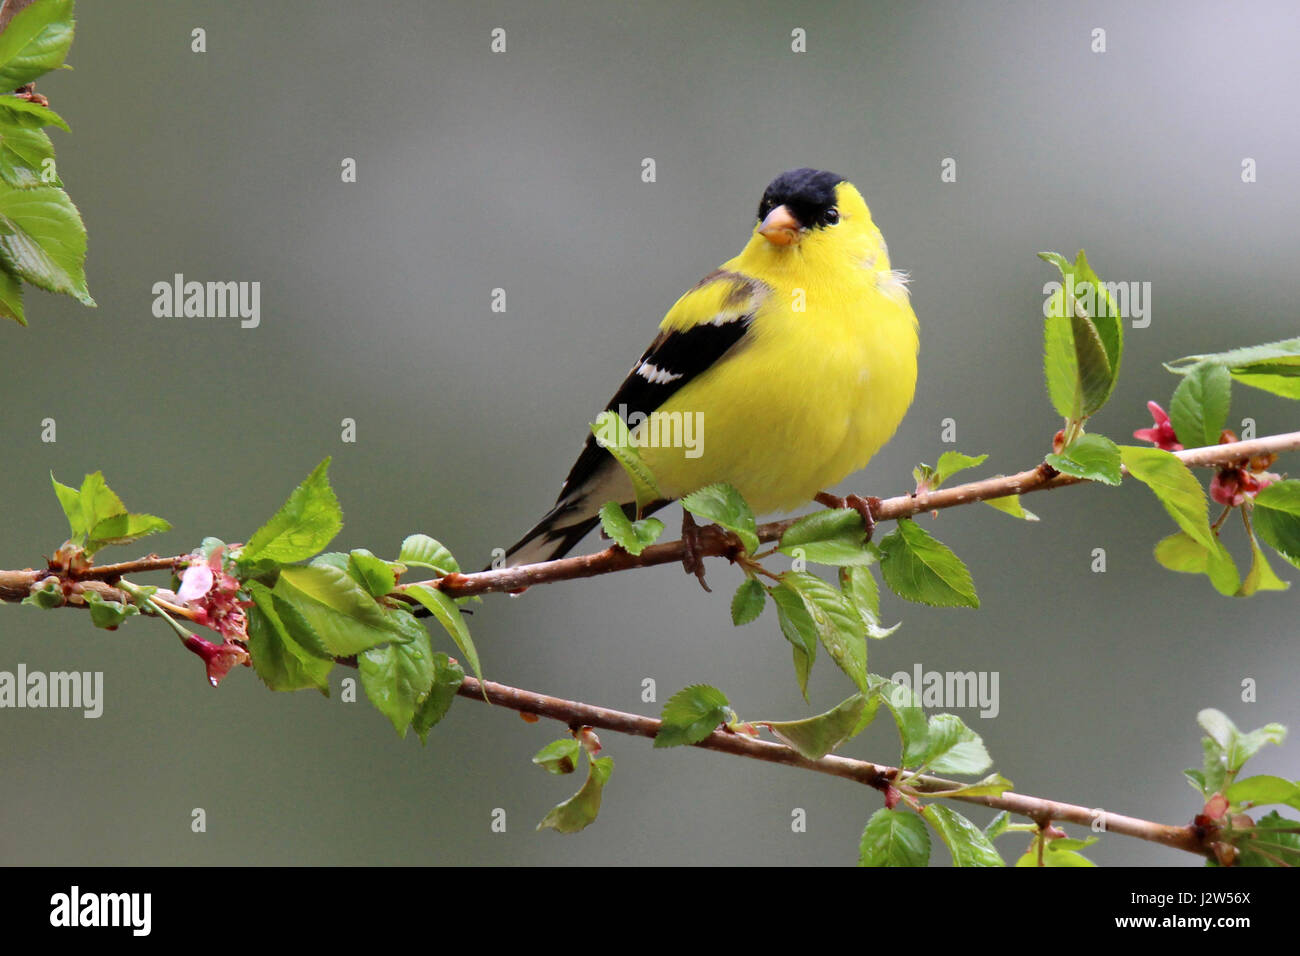 A male American goldfinch Carduelis tristis perching on flowering branches in Spring Stock Photo